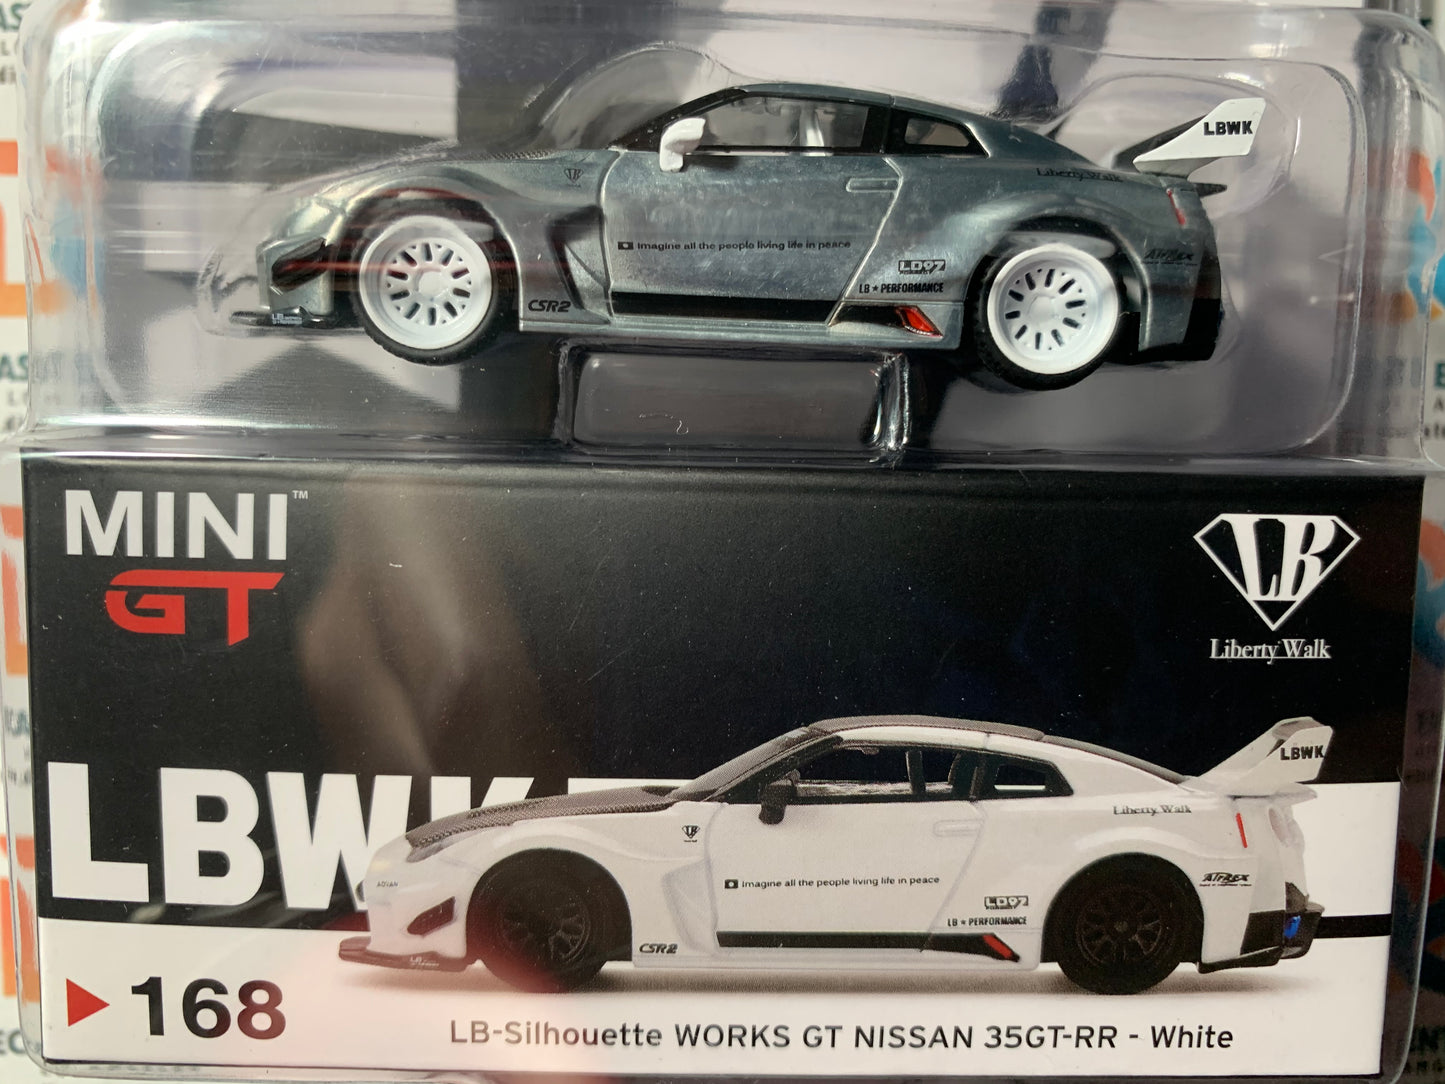 CHASE Mini GT Mijo Exclusive 168 LB Silhouette Works GT Nissan 35GT RR White 1:64